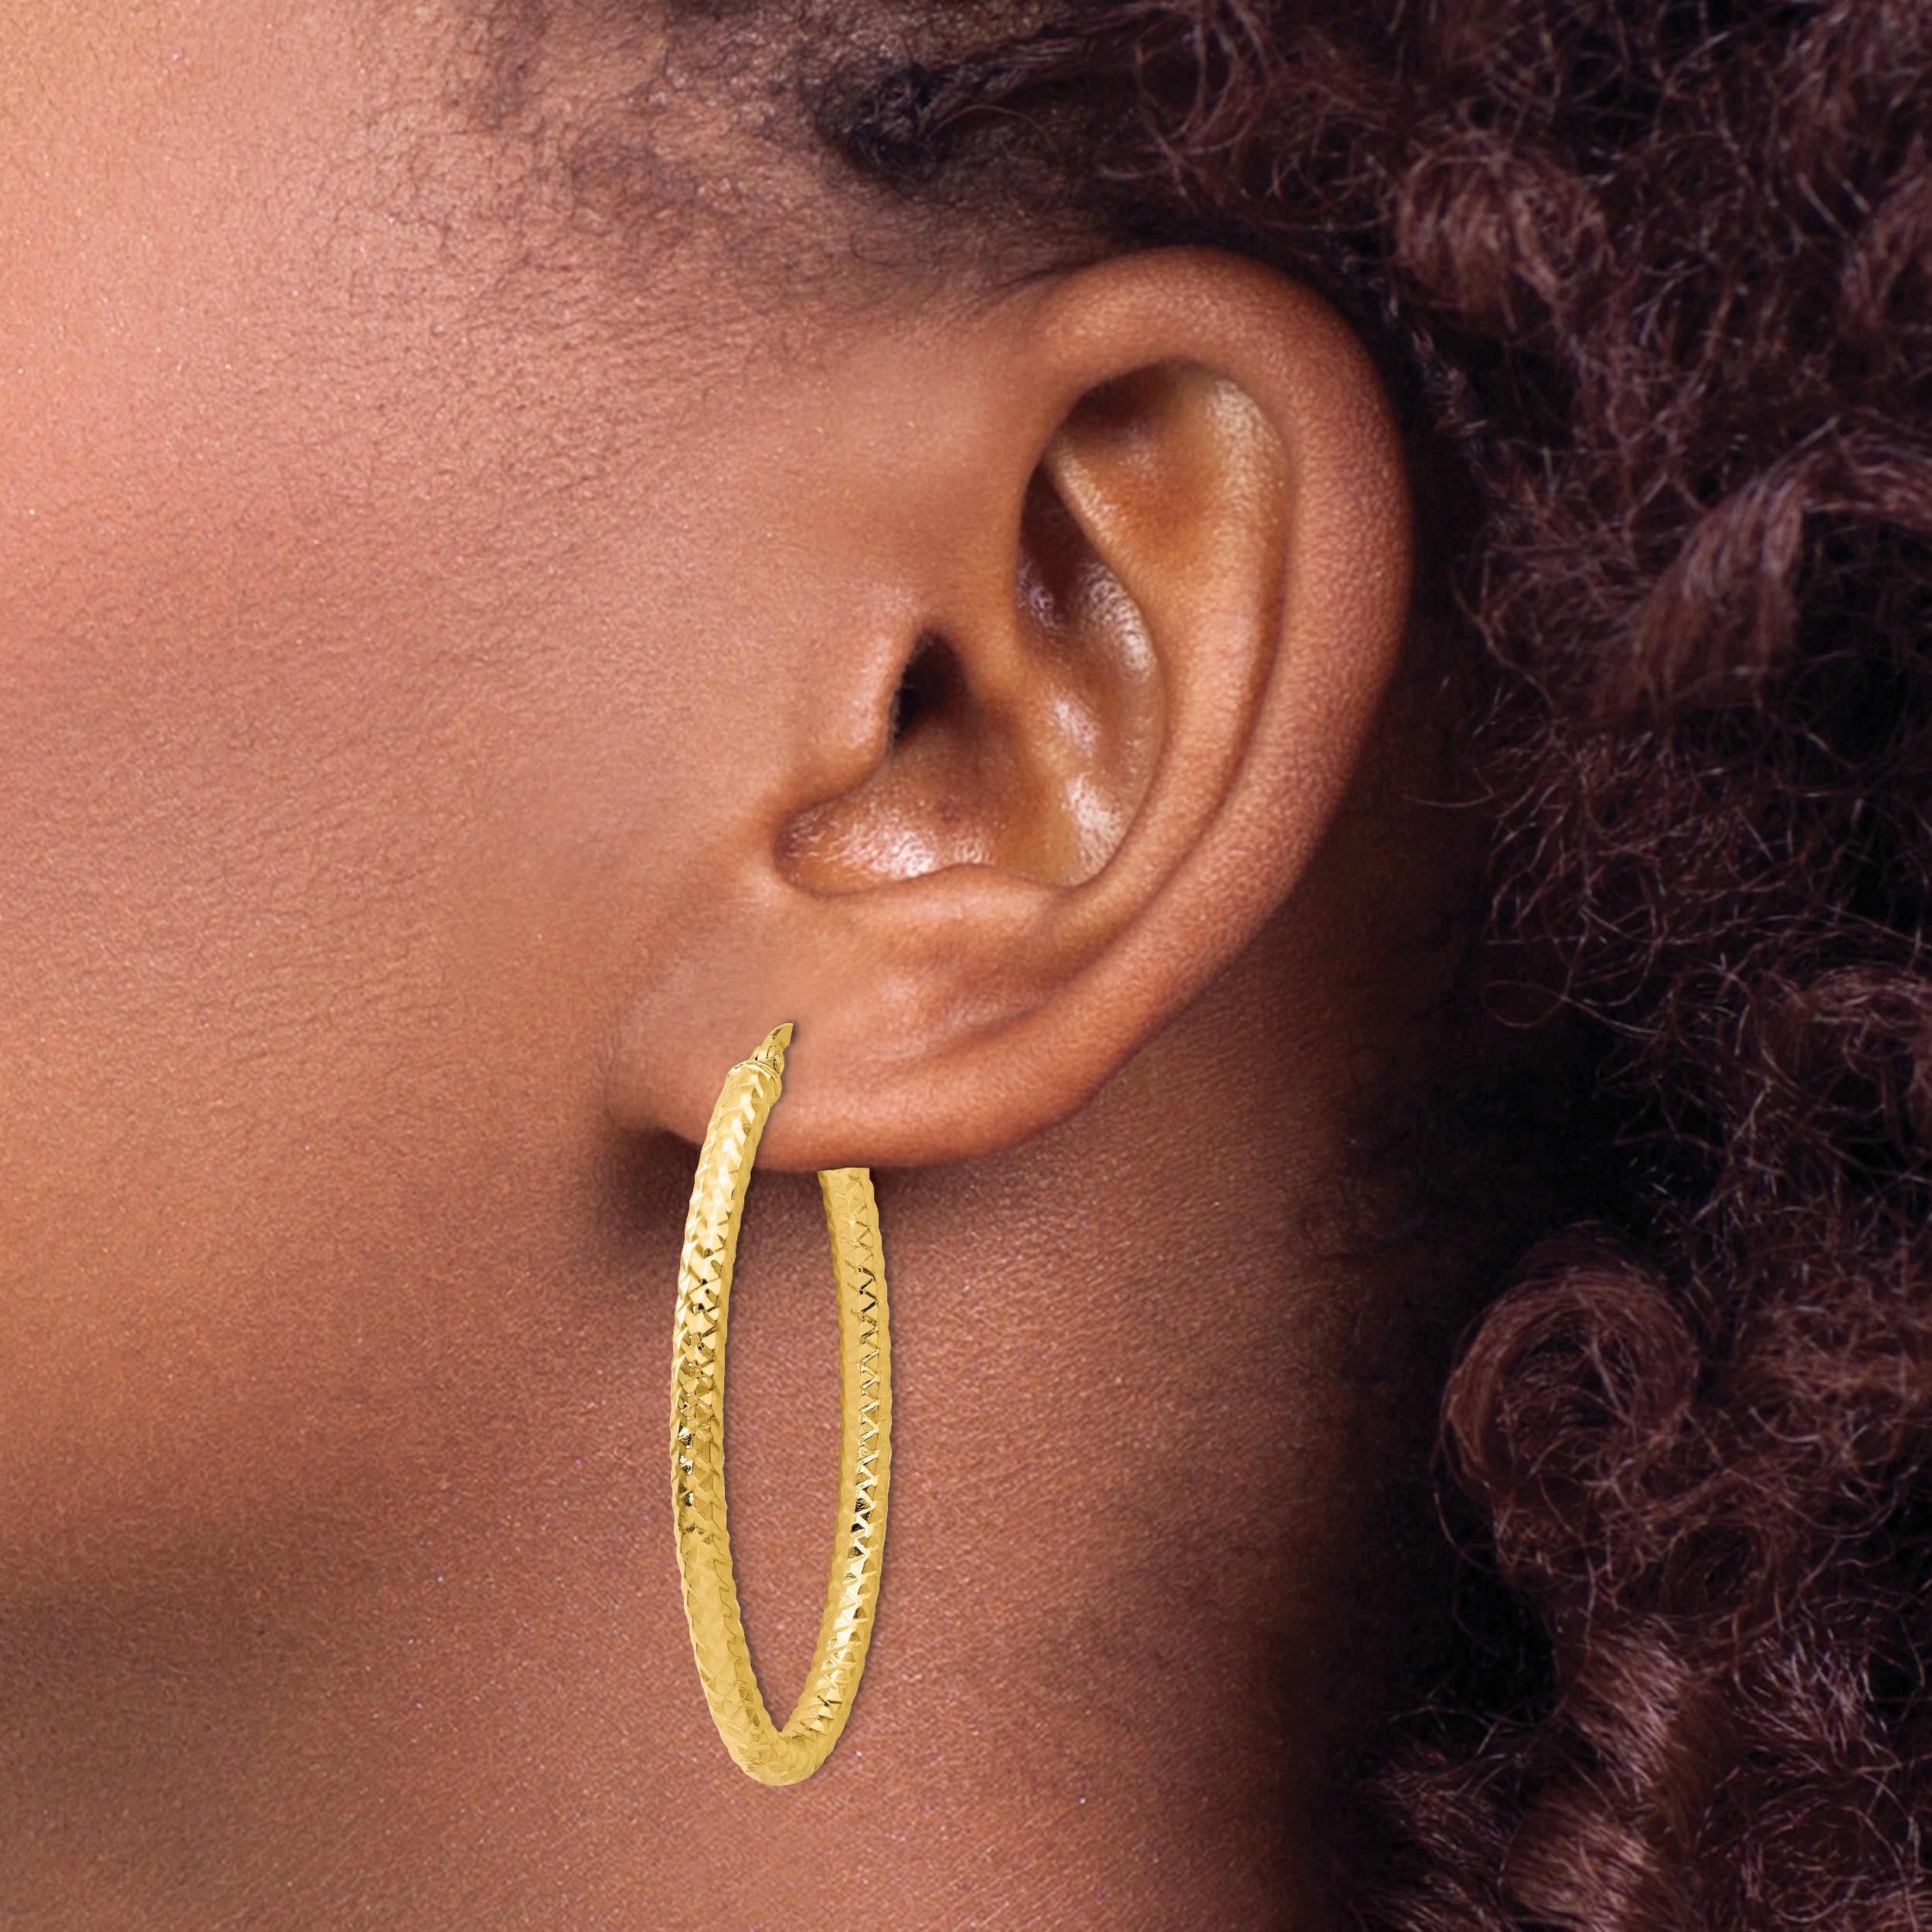 14K ForeverLite Polished and Textured Oval Hoop Earrings